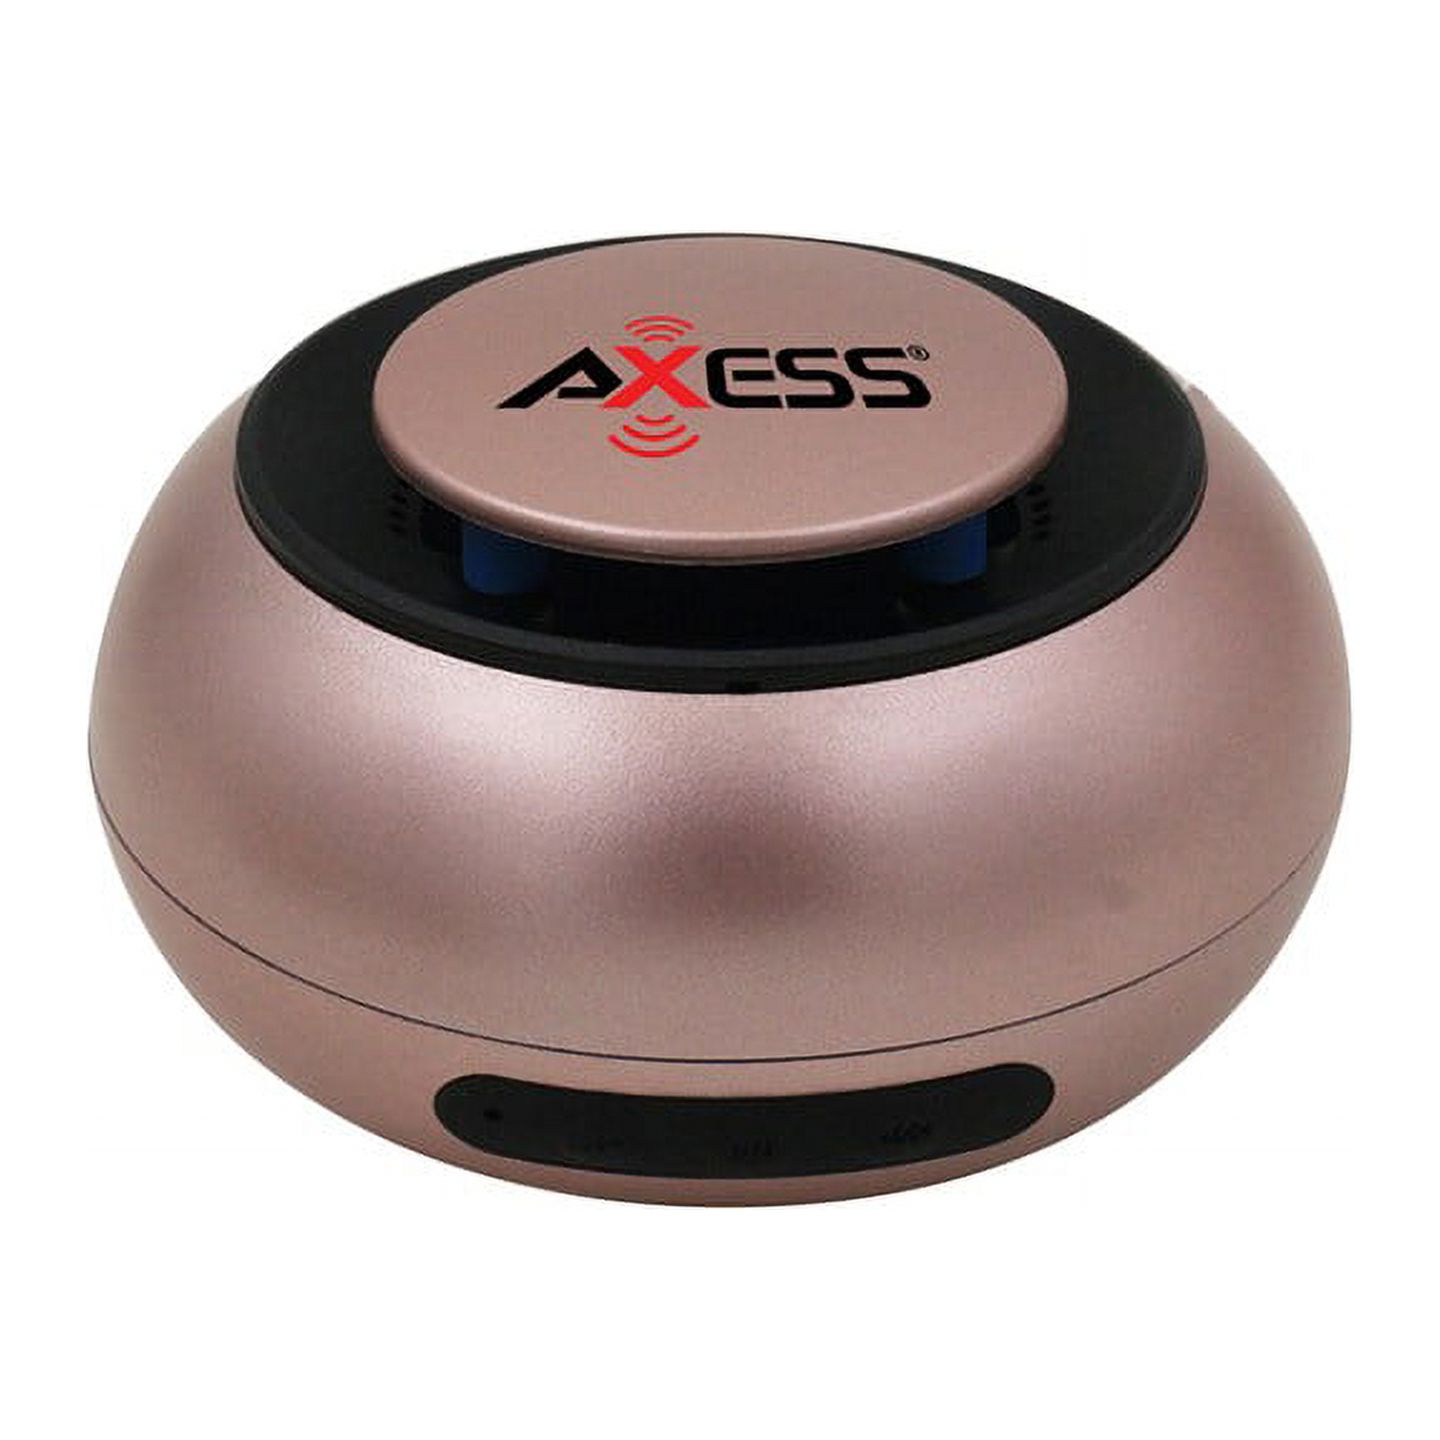 AXESS Bluetooth Speaker Built-In Rechargeable Battery Rose Gold SPBW1048RG - image 1 of 5